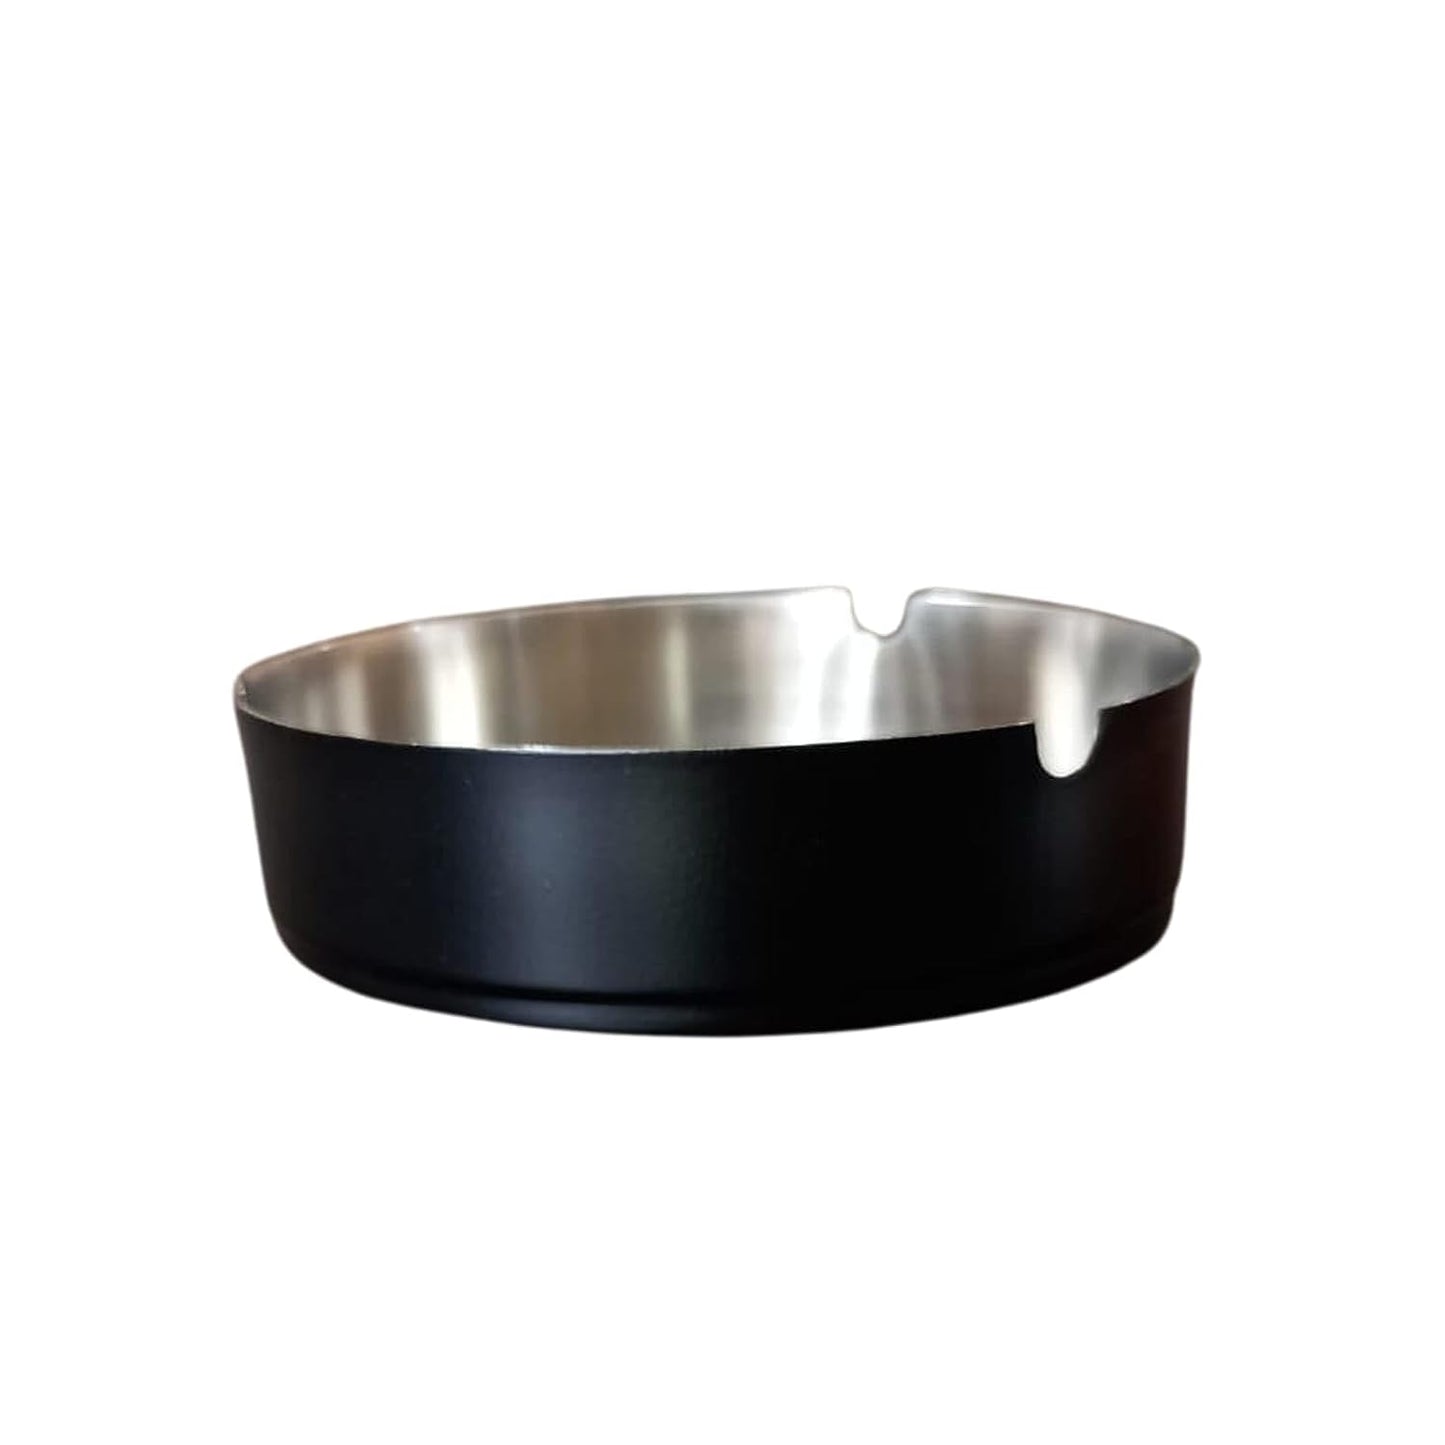 Roll over image to zoom in  Rudra Exports Stainless Steel Round Metal Cigar Holding Cigarette Ashtray for Home or Office, hotels, or restaurants. (12 cm Ashtry)